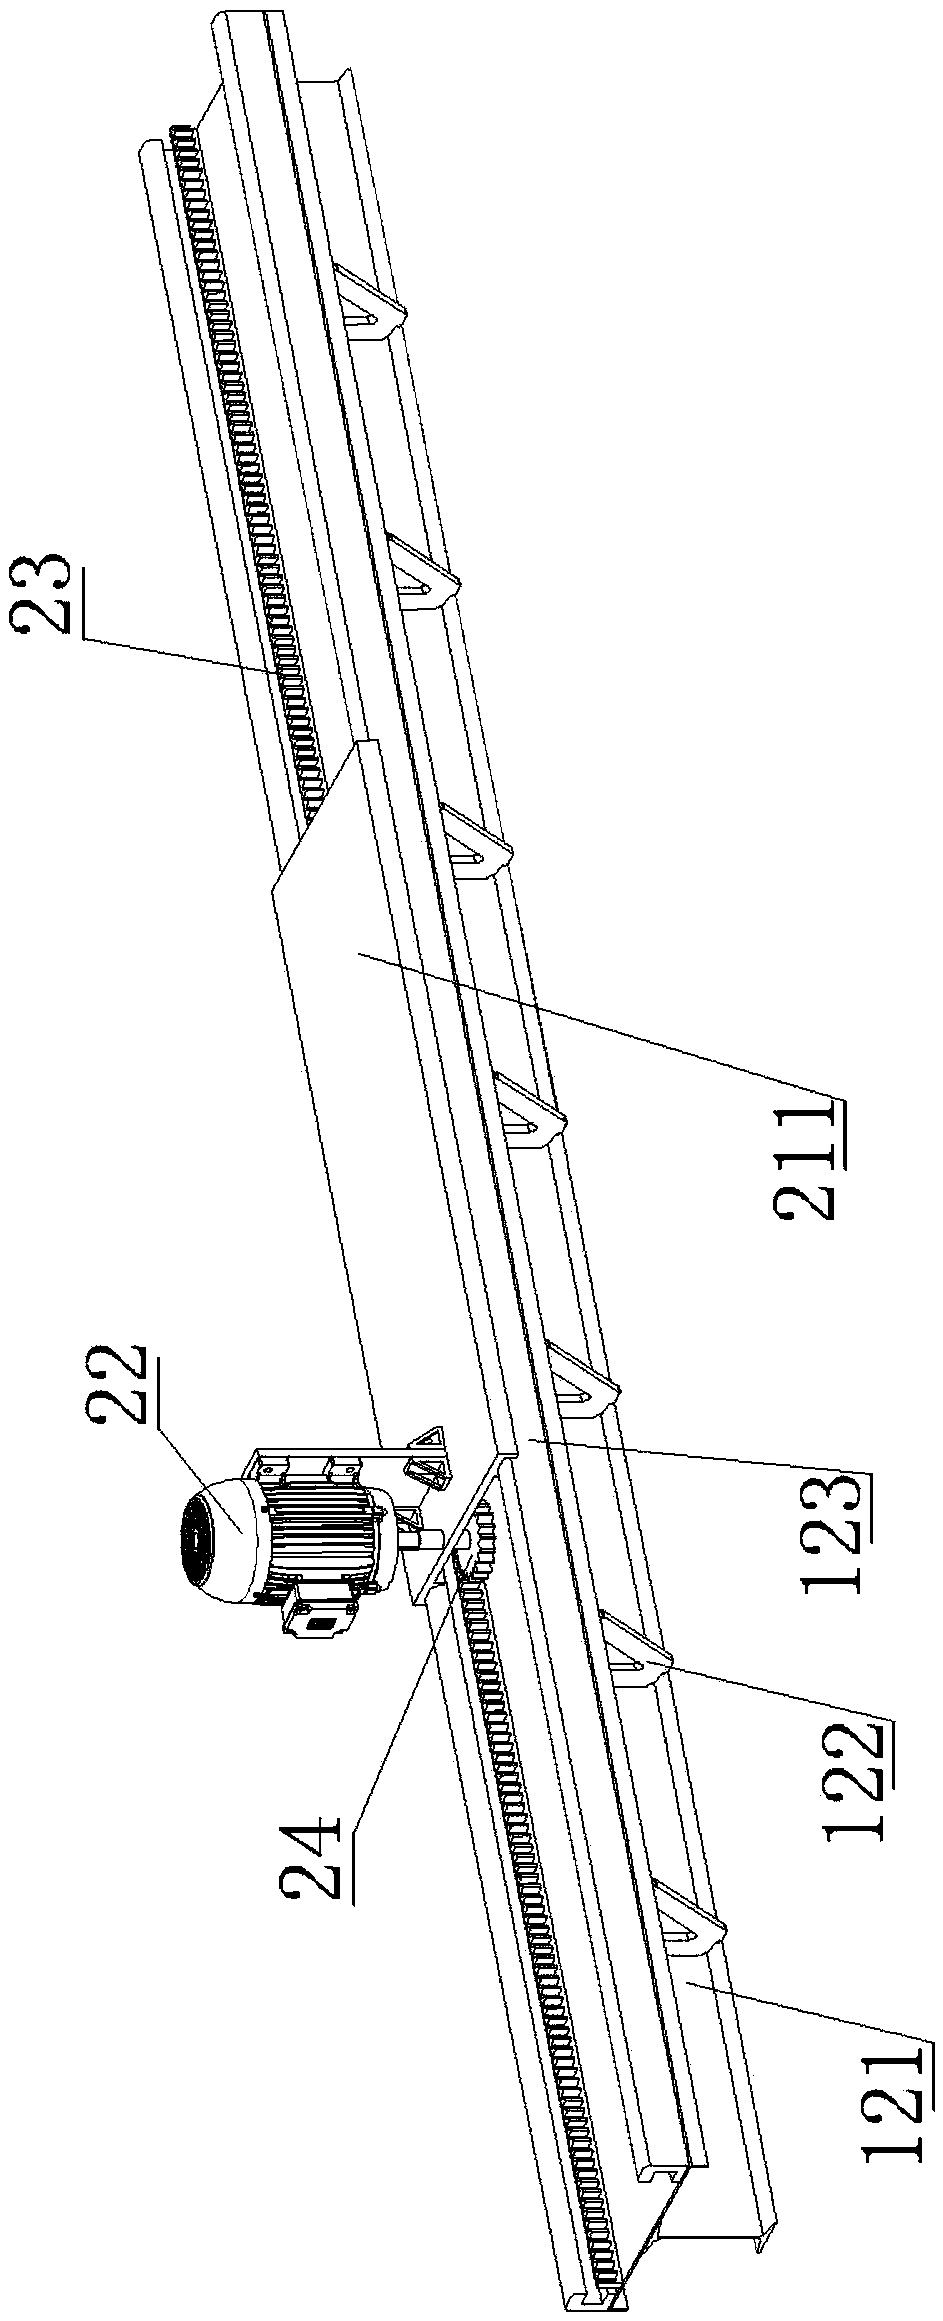 Automatic assembling and disassembling system for flower pot module in vertical greening operation